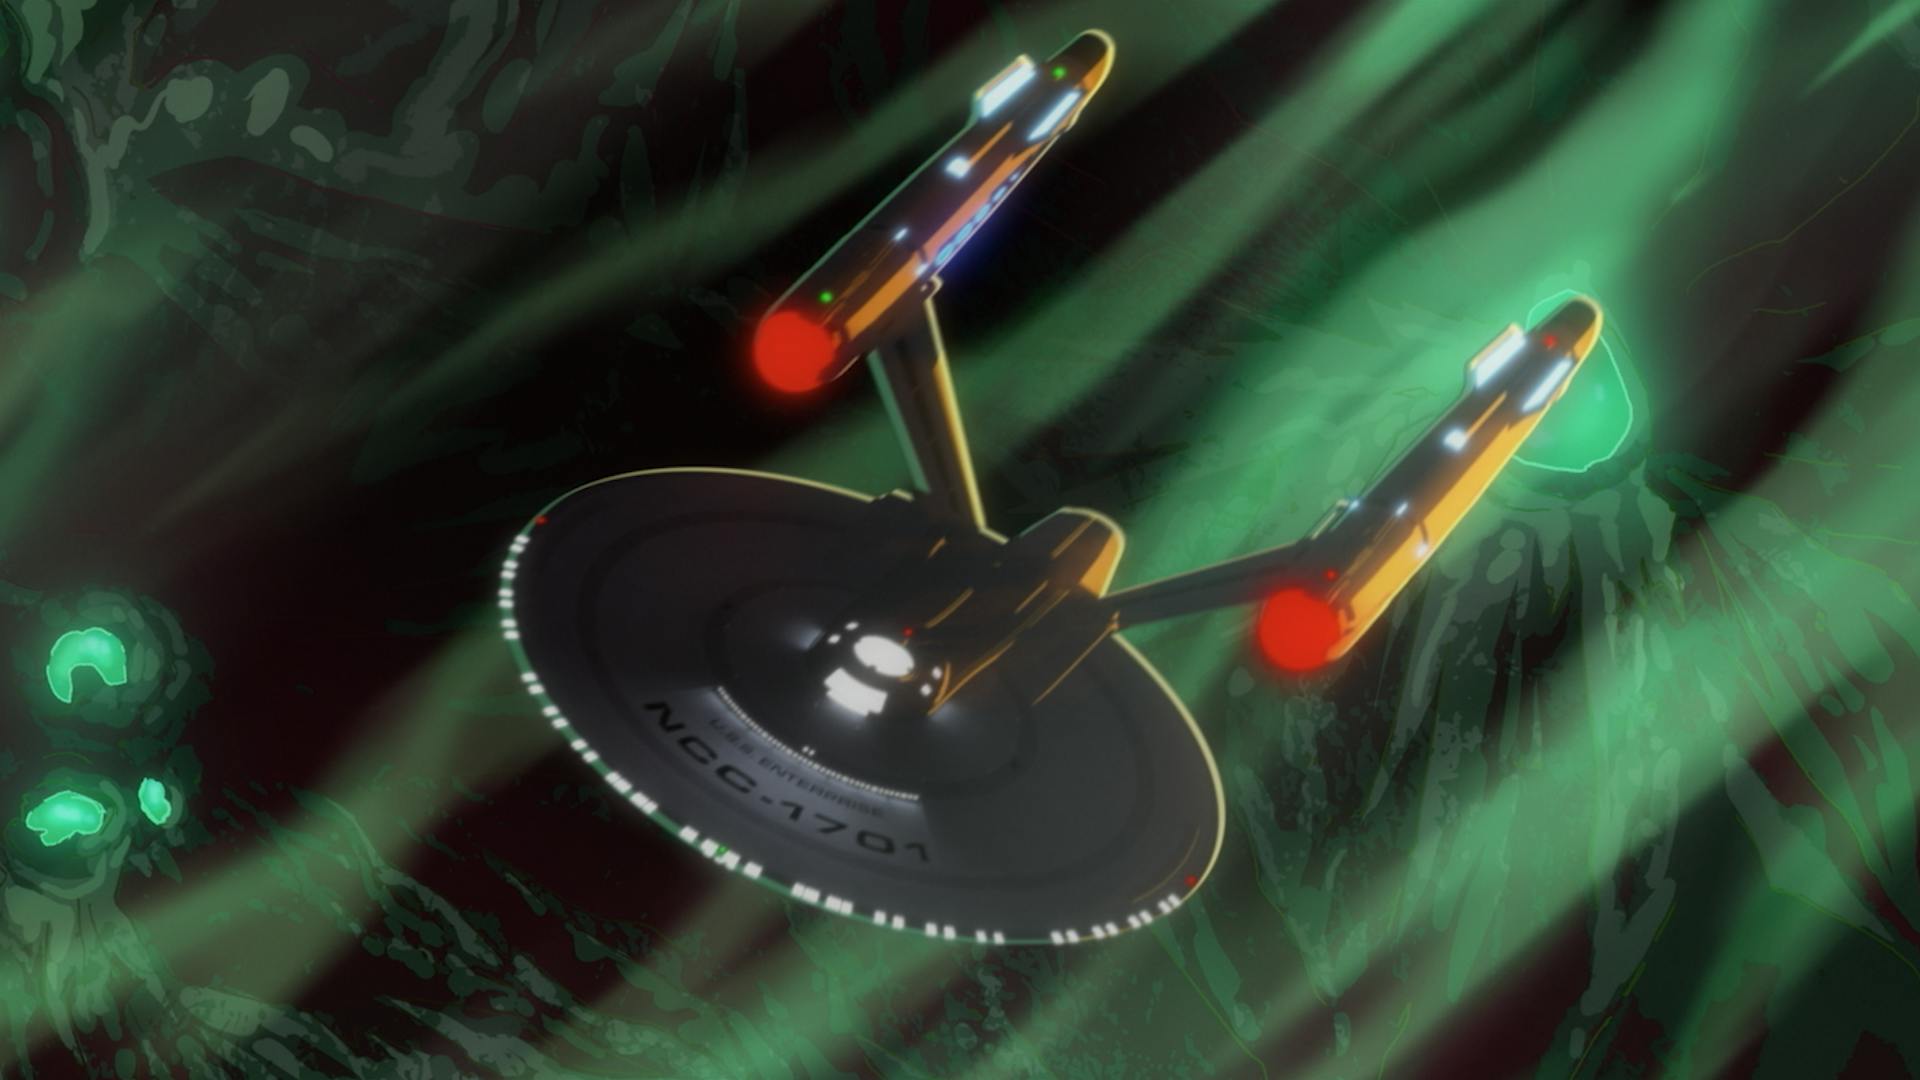 Star Trek: Strange New Worlds - Those Old Scientists animated sequence with an animated U.S.S. Enterprise